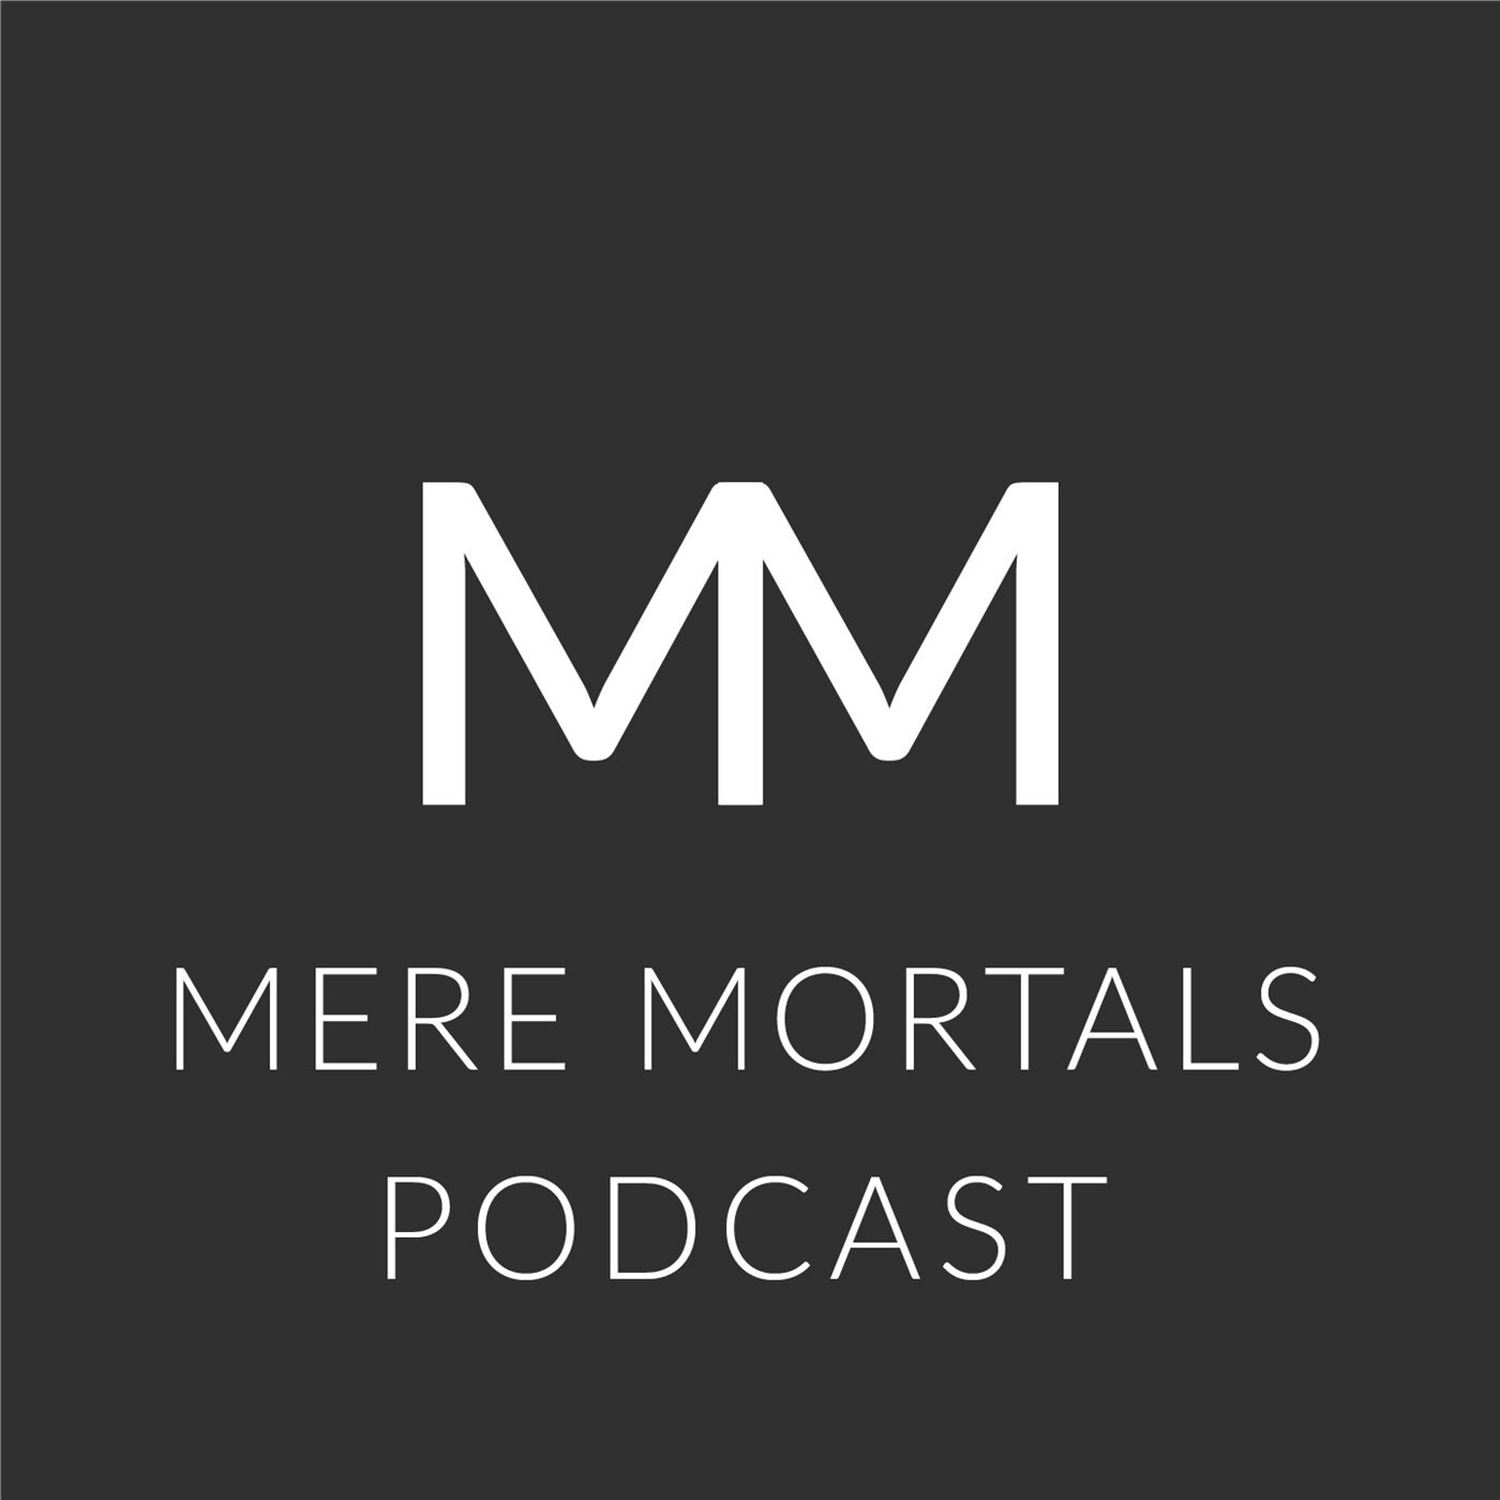 Becoming An Eminently Qualified Human Being (Mere Mortals Episode #91 - Long-Term Goals)